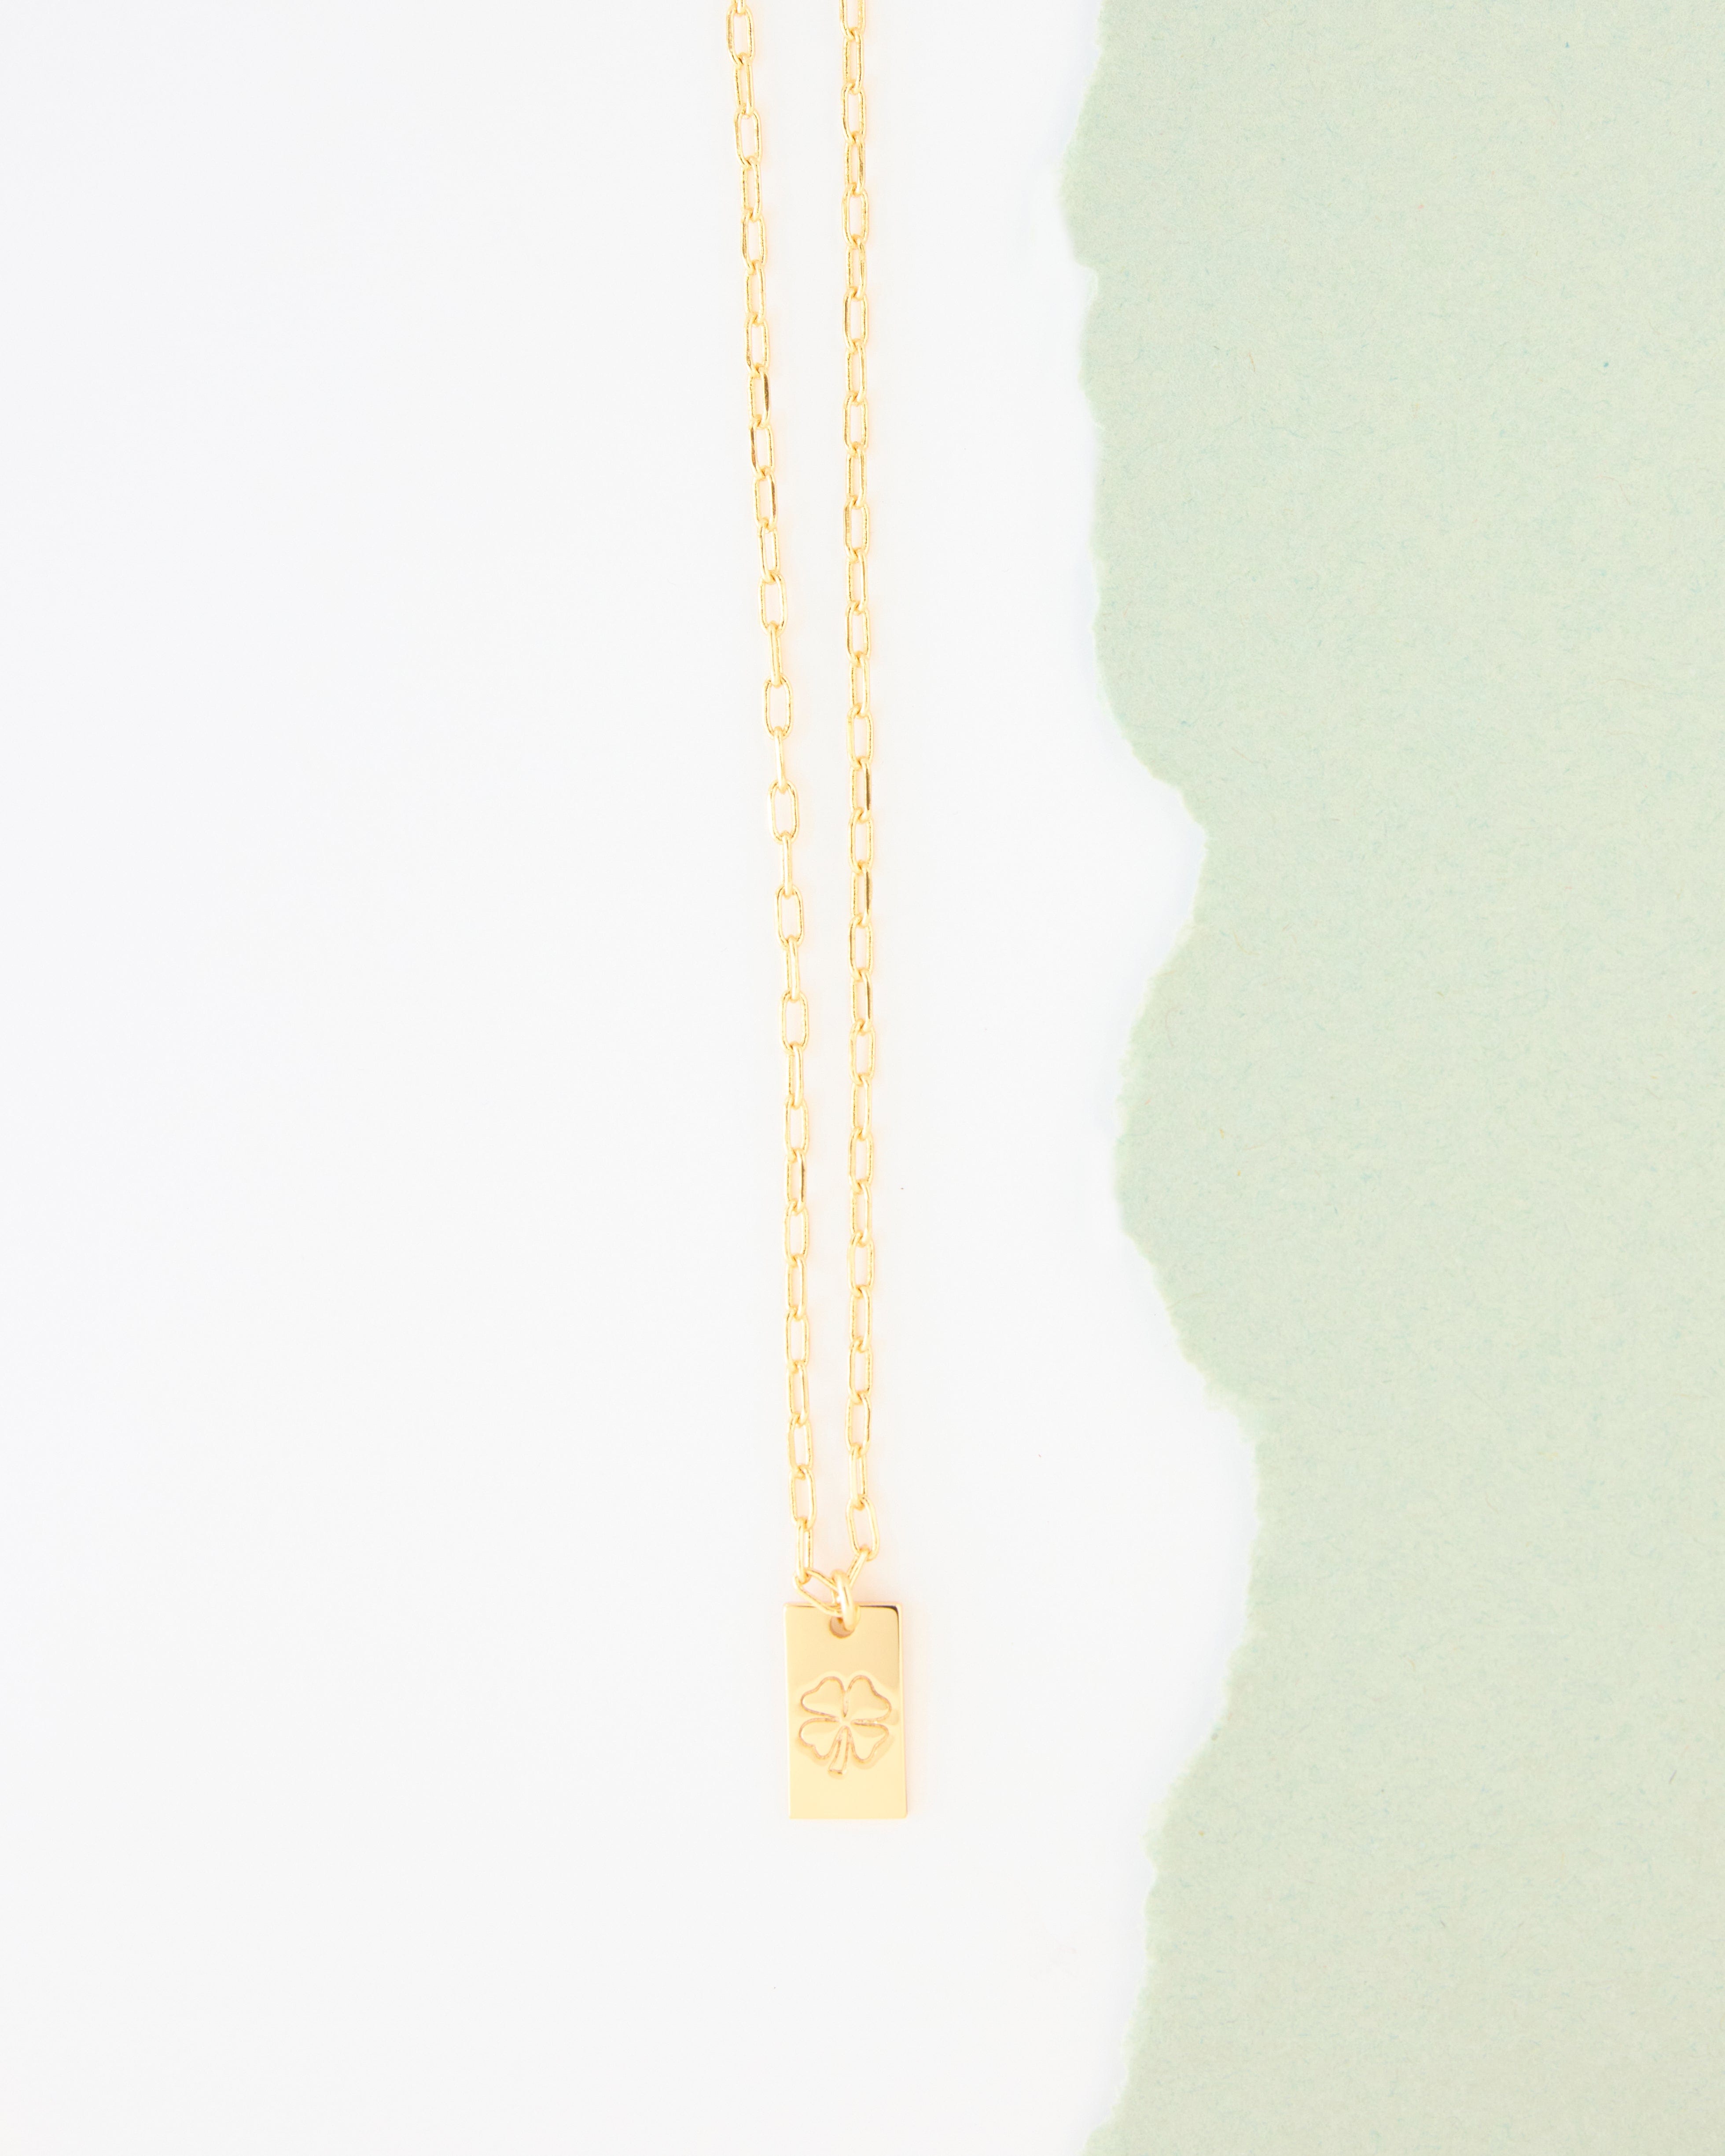 Gold necklace with four leaf clover on charm.